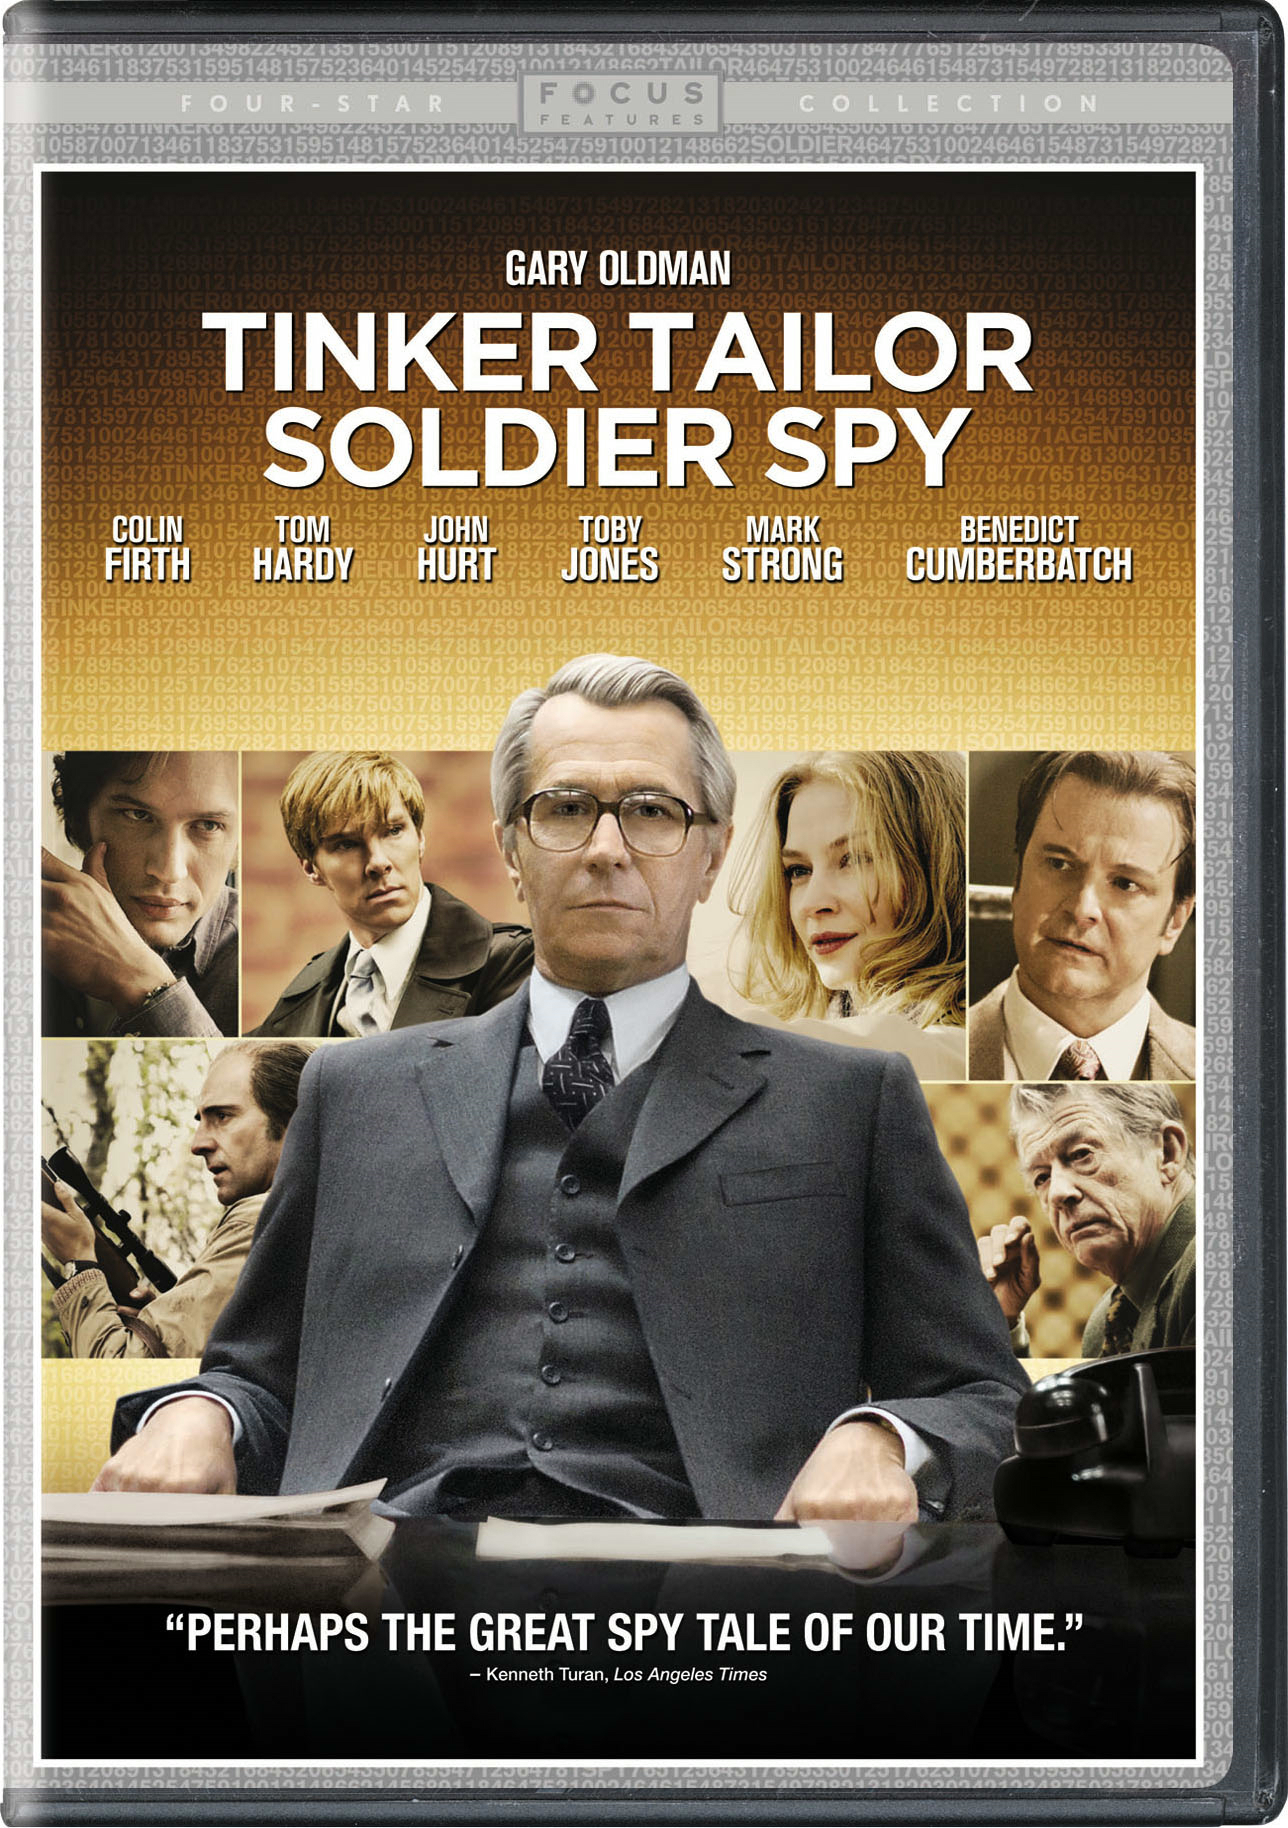 Tinker Tailor Soldier Spy - DVD [ 2011 ]  - Drama Television On DVD - TV Shows On GRUV